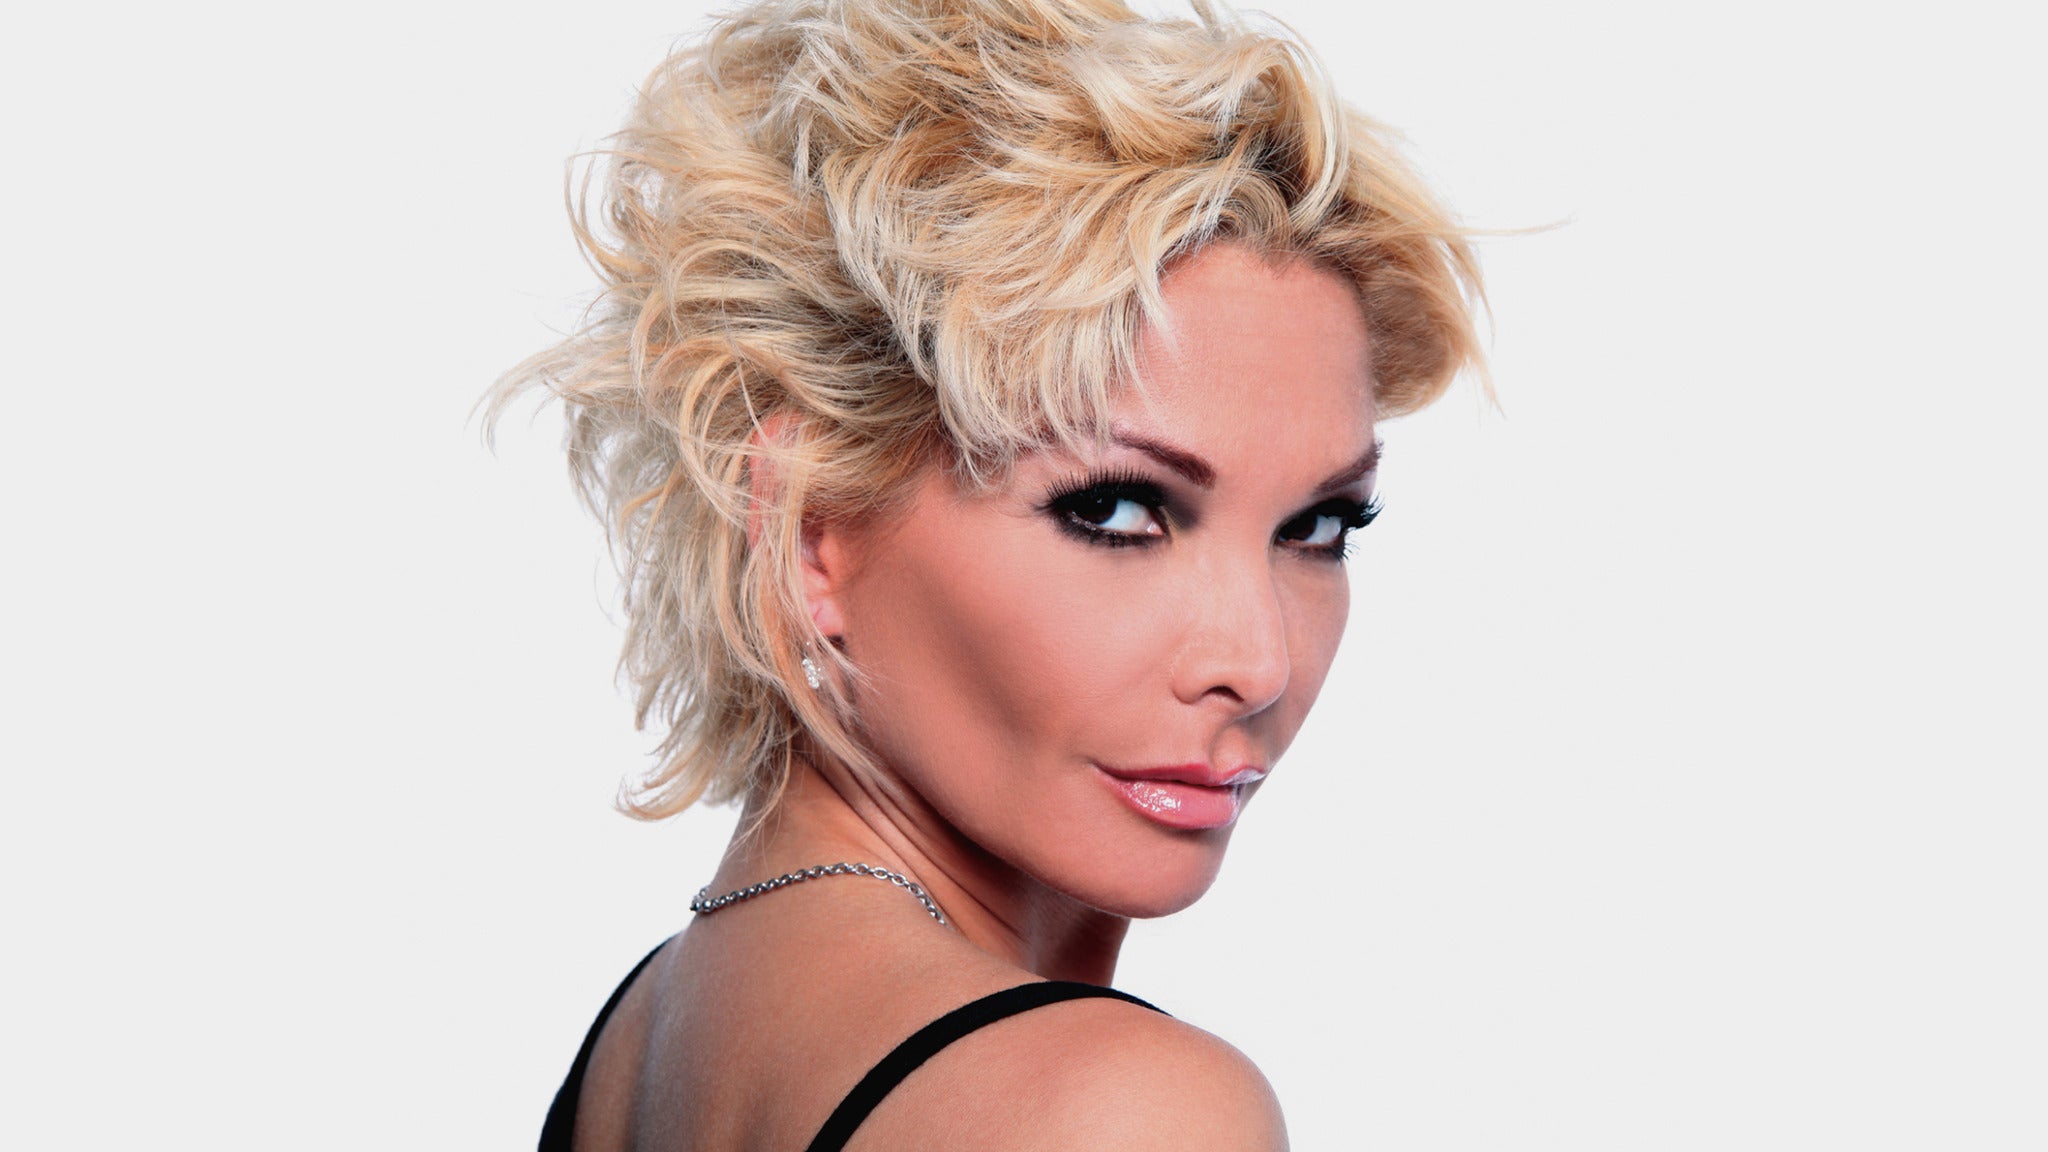 Marisela with special guest Americo in New York promo photo for Local presale offer code